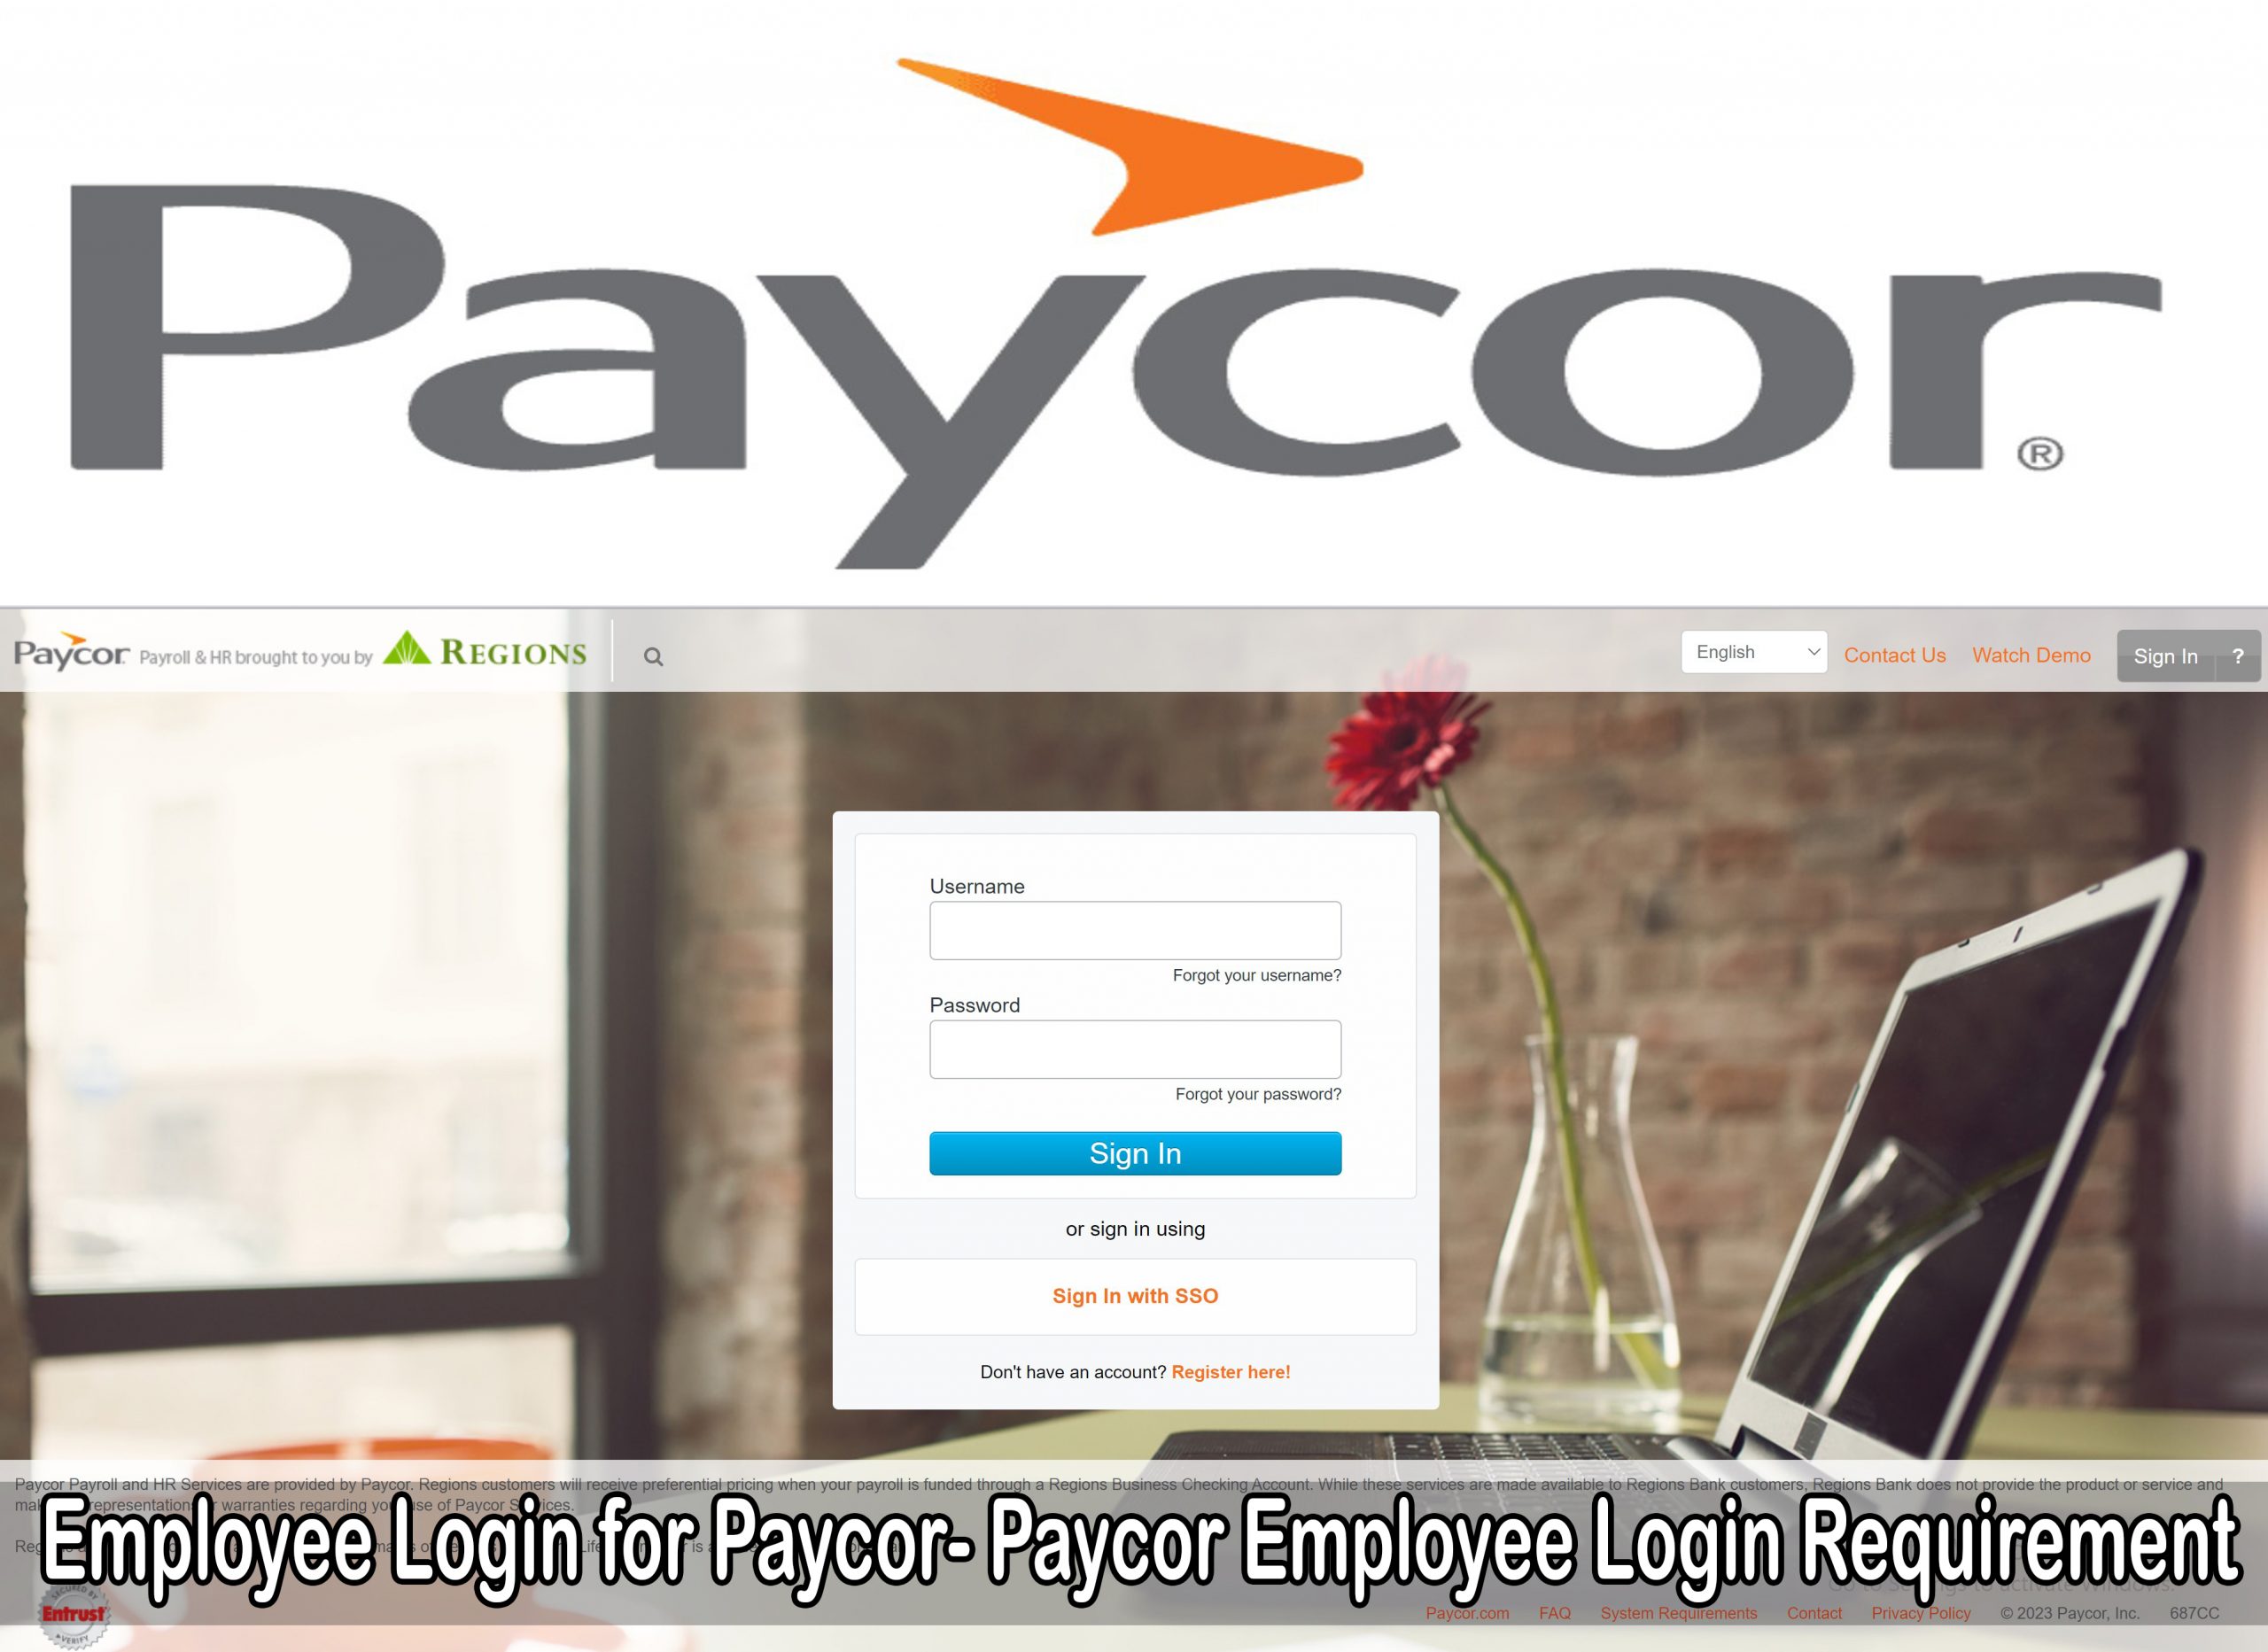 Employee Login for Paycor- Paycor Employee Login Requirement